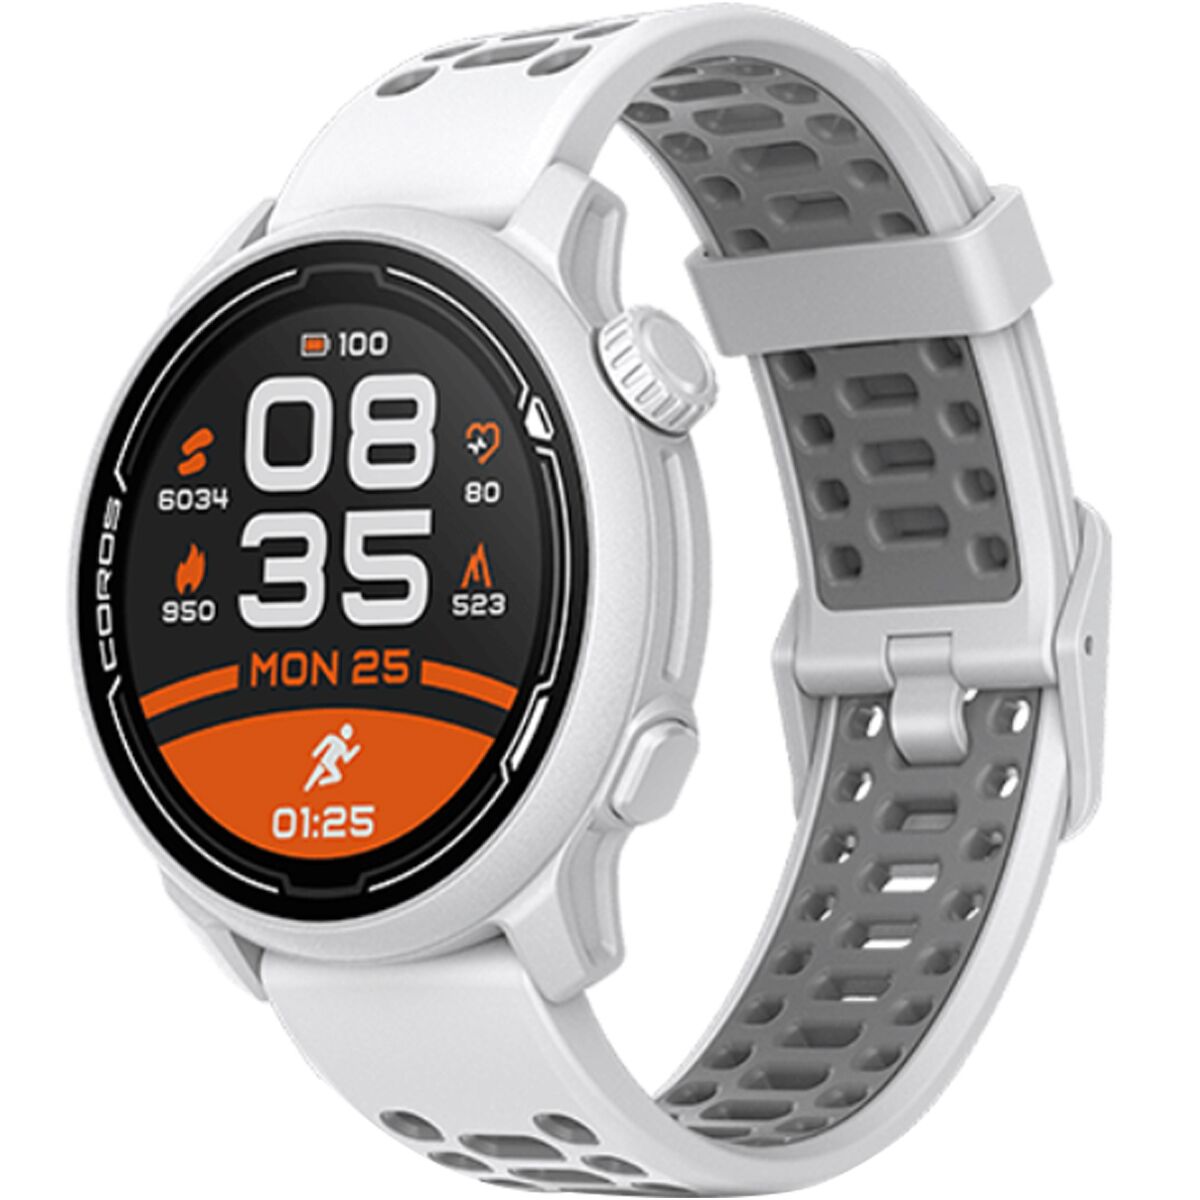 COROS-PACE 2 WHITE WITH SILICONE BAND WHITE - Montre cardio GPS